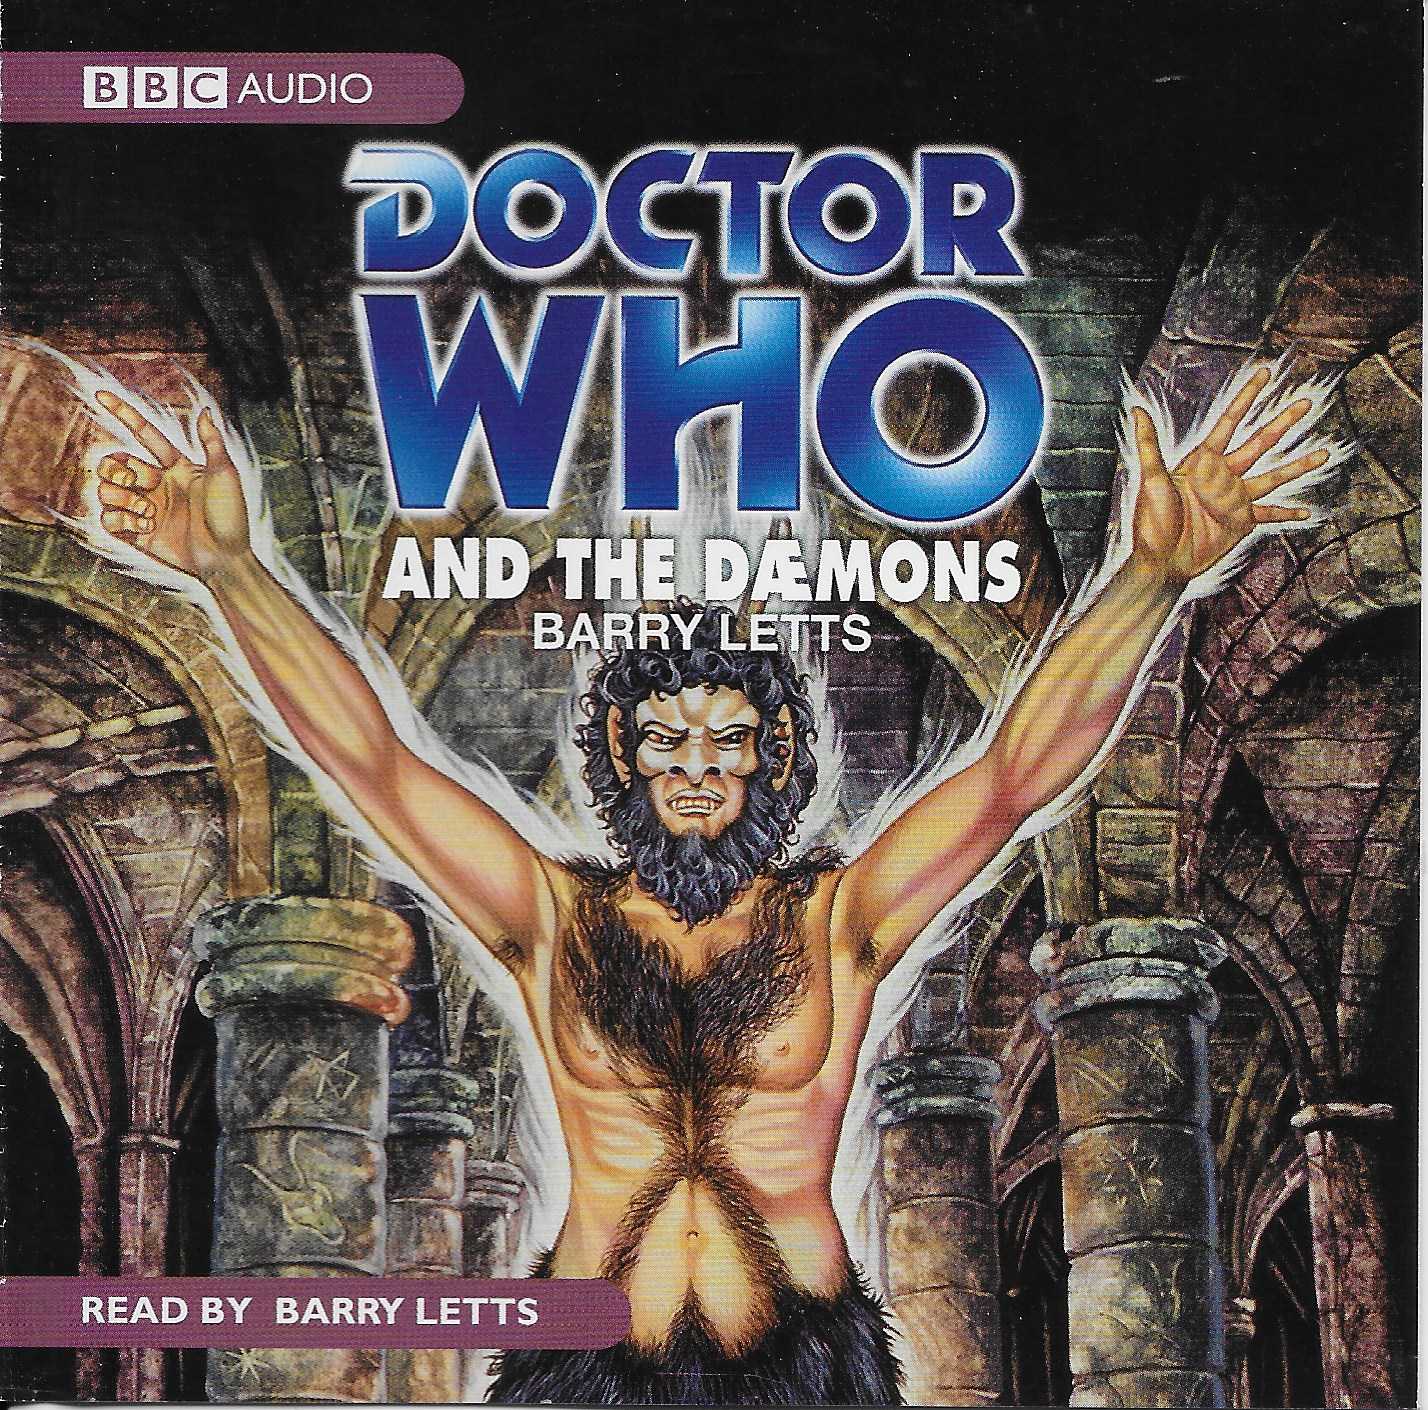 Picture of ISBN 978-1-405-68762-1 Doctor Who - And the Daemons by artist Barry Letts / Guy Leopold from the BBC records and Tapes library